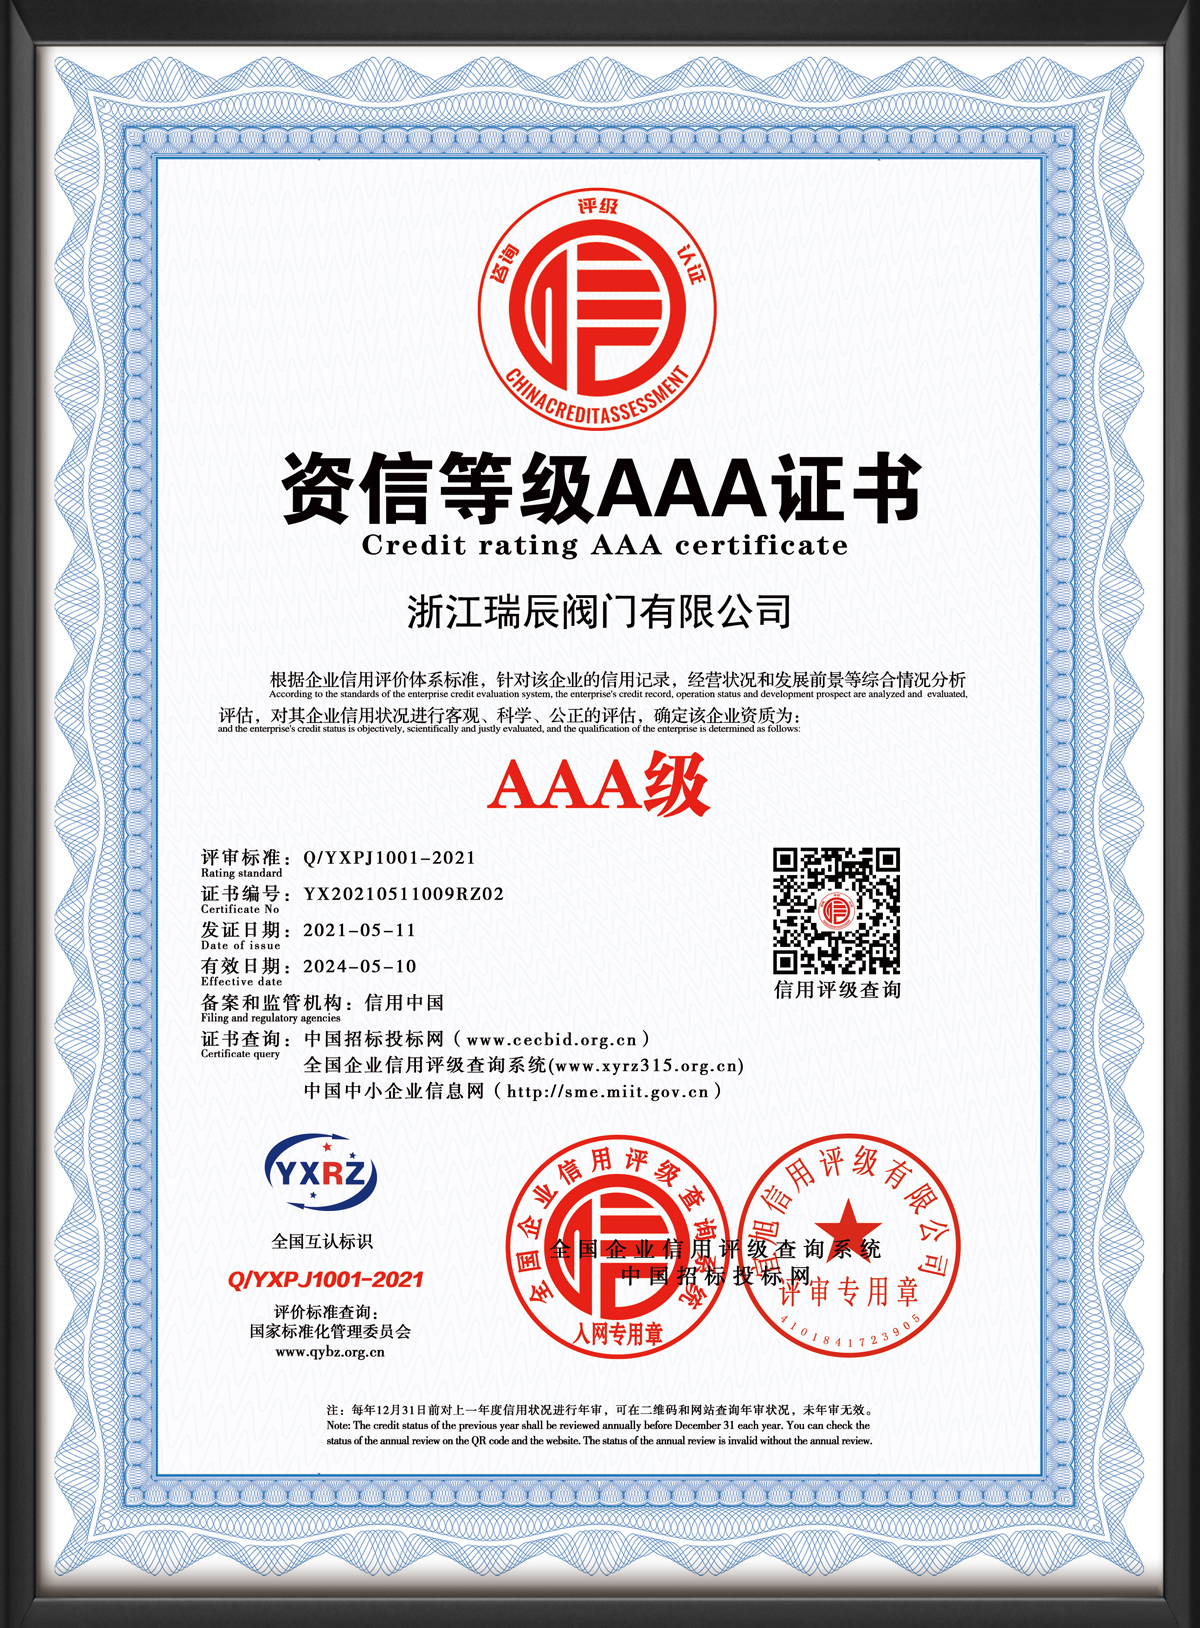 Credit rating 3A certificate